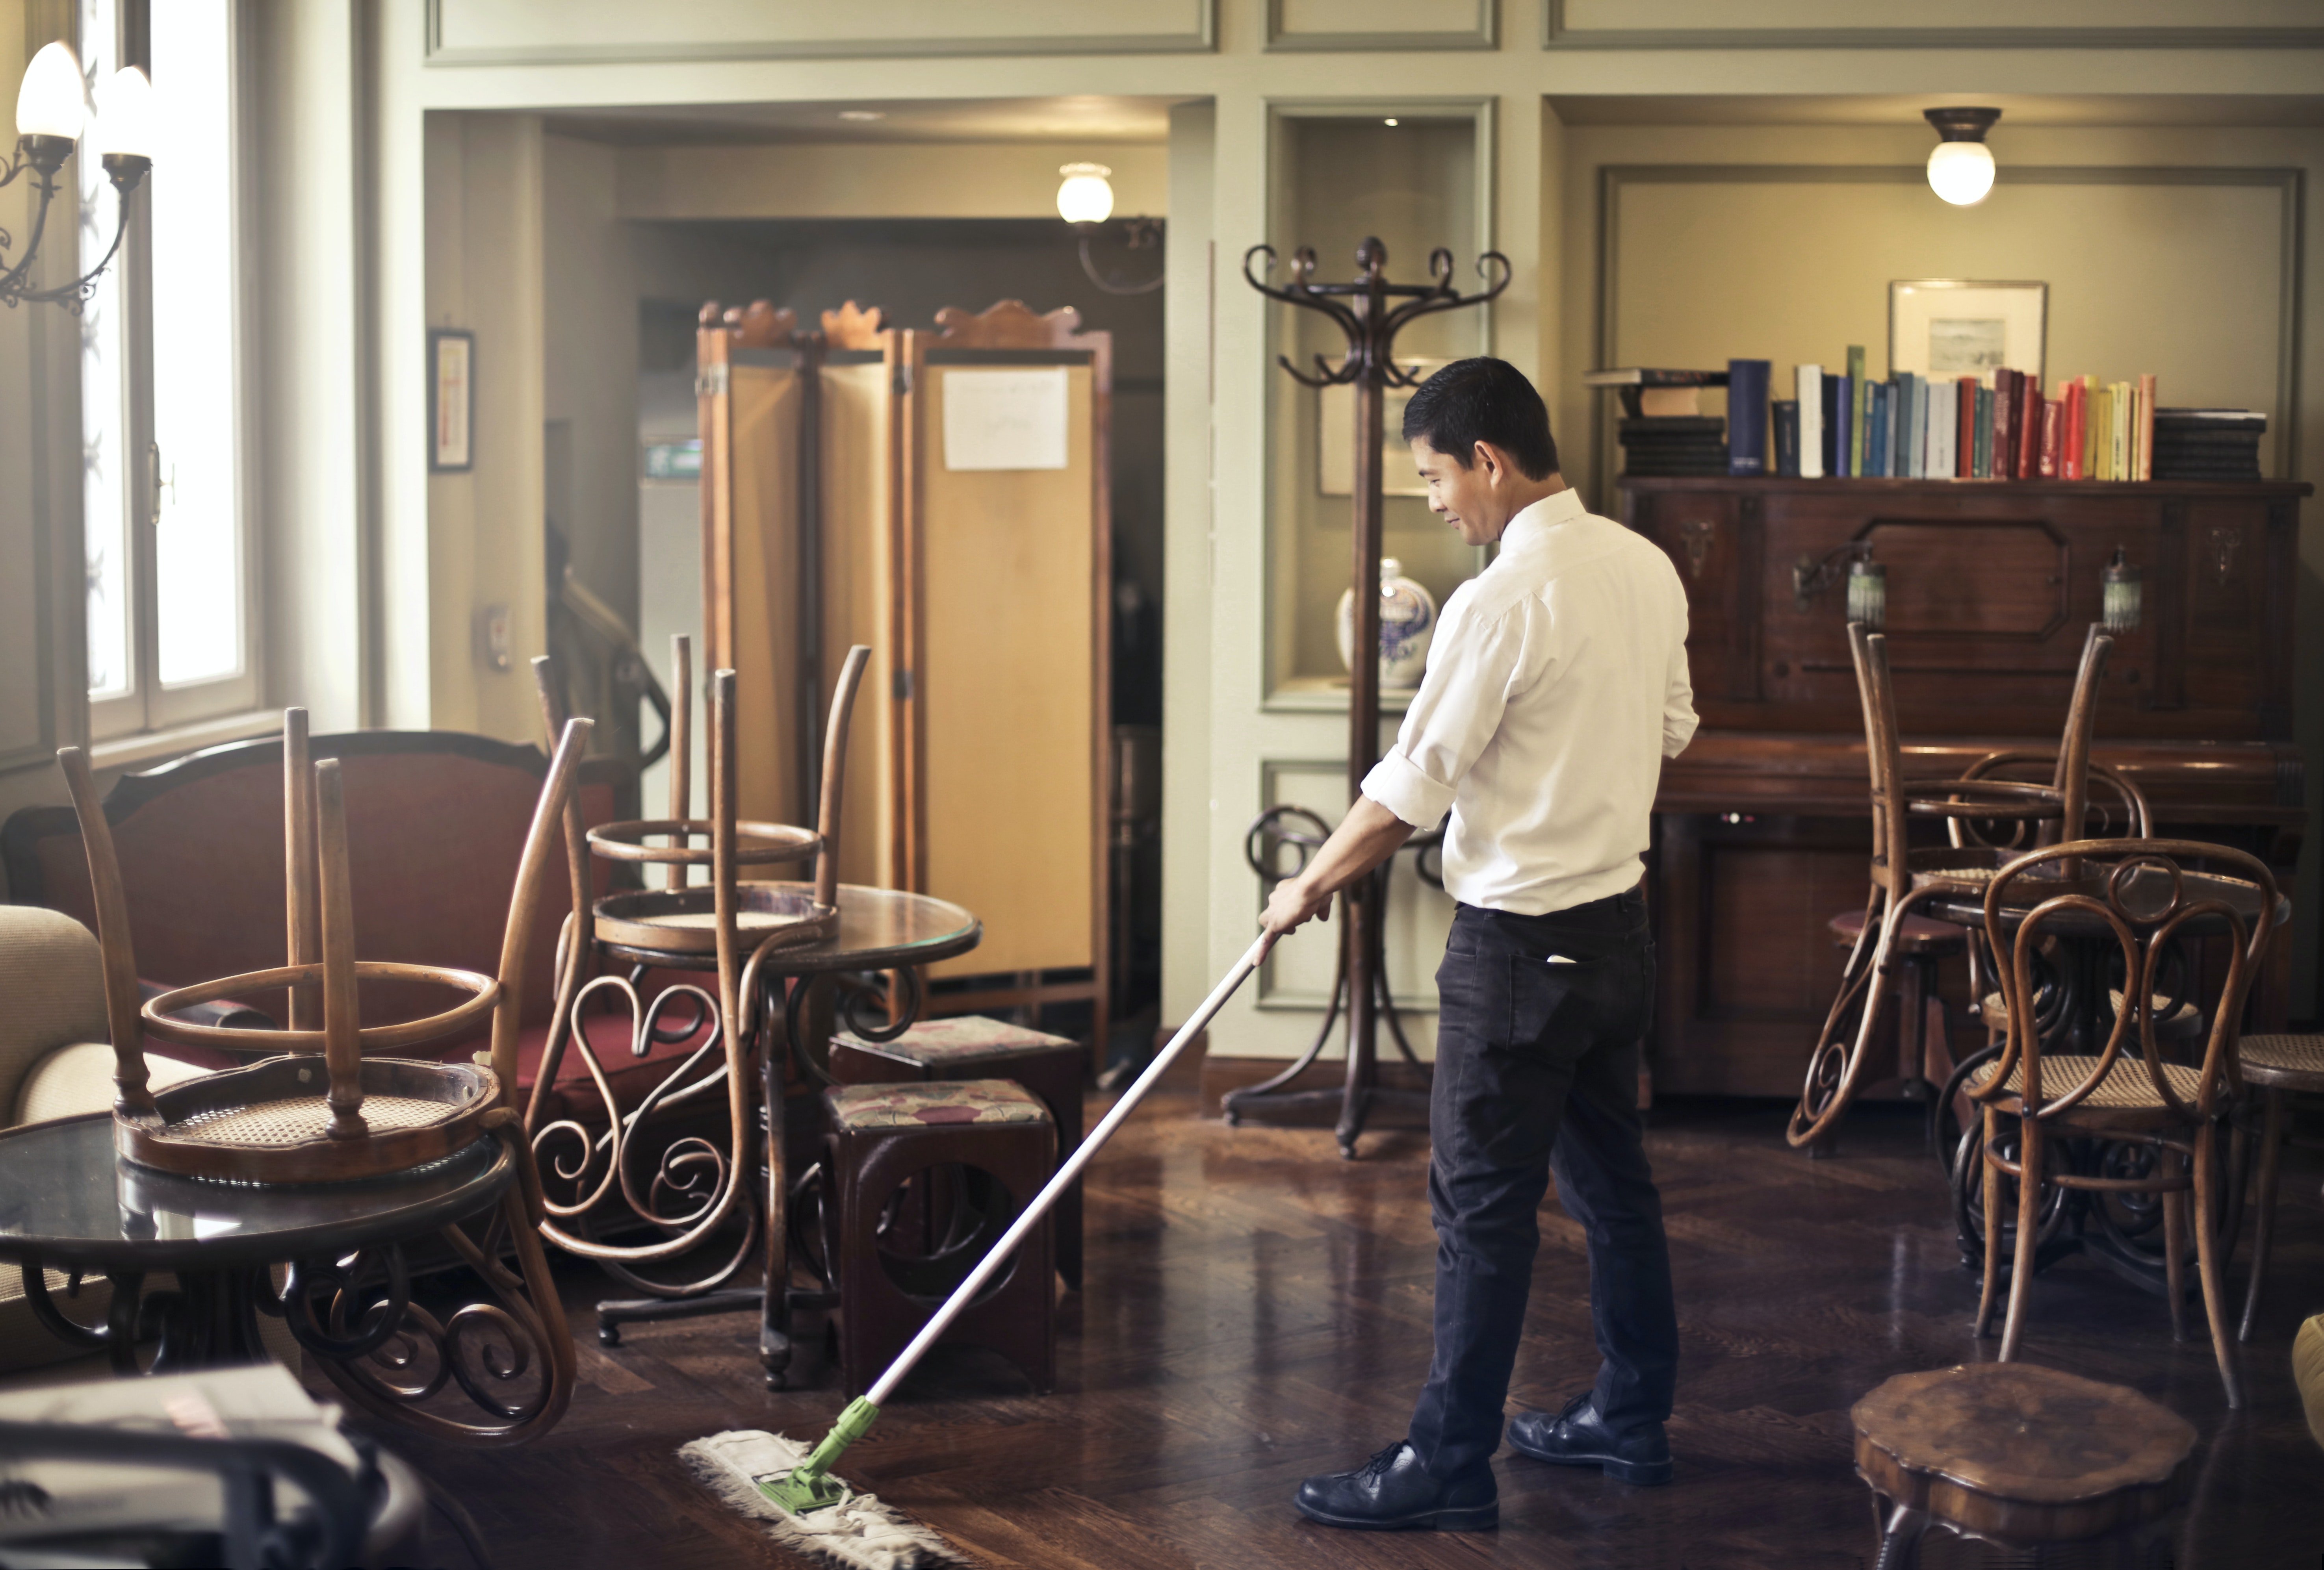 The man mopping the floor was Brad. | Source: Pexels